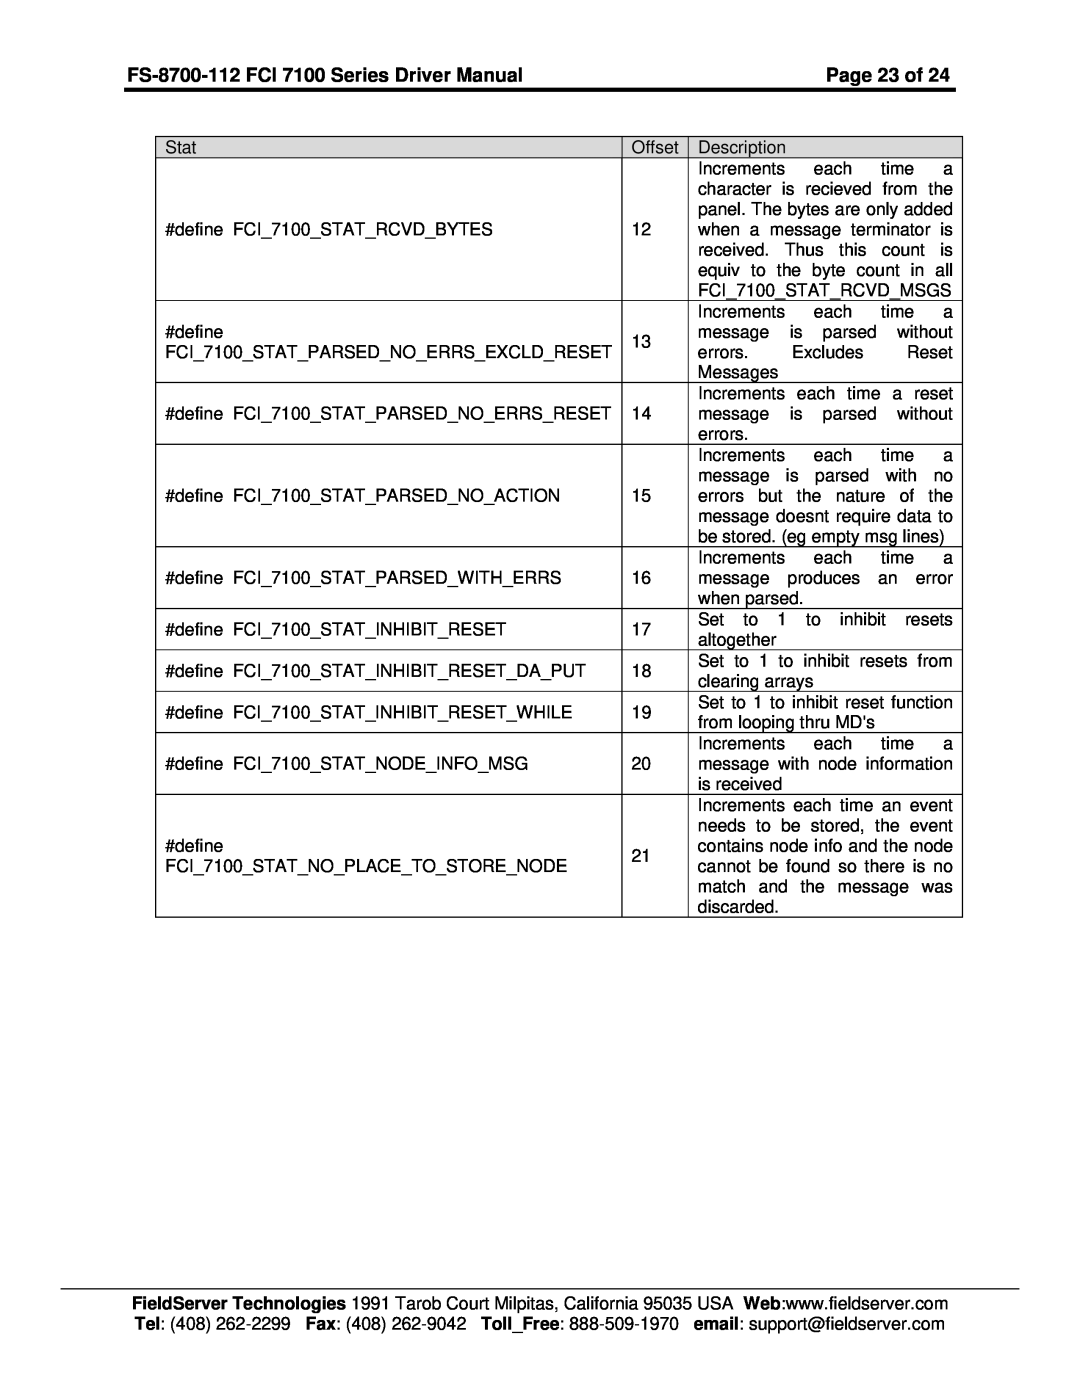 FieldServer instruction manual Page 23 of, FS-8700-112 FCI 7100 Series Driver Manual 